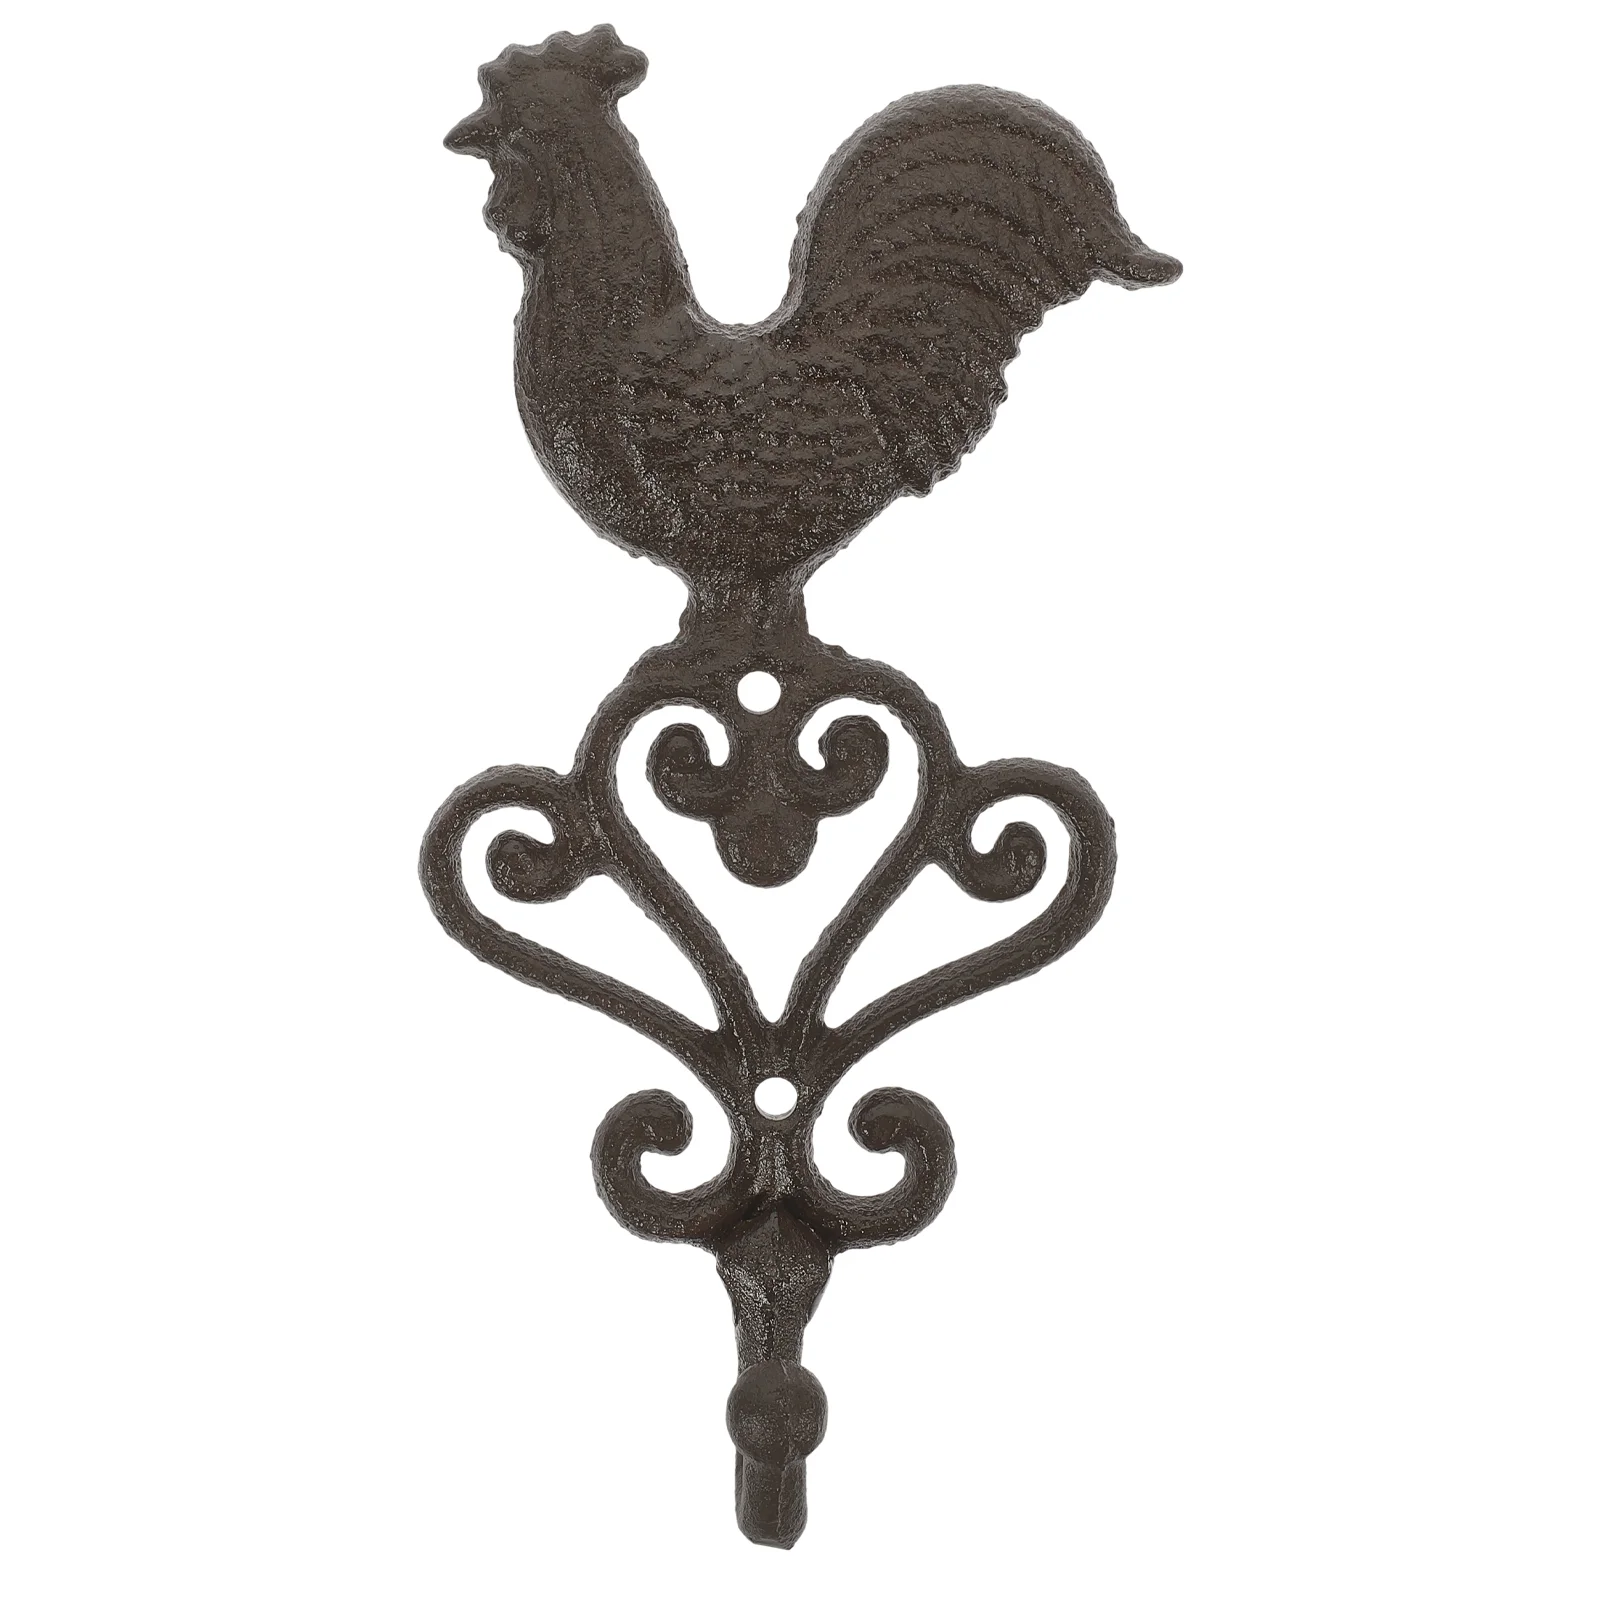 

Metal Clothing Rack Heavy Duty Hook Towel Storage Cast Iron Wall Hanger Rooster Shape Coat Clothes Hooks Office